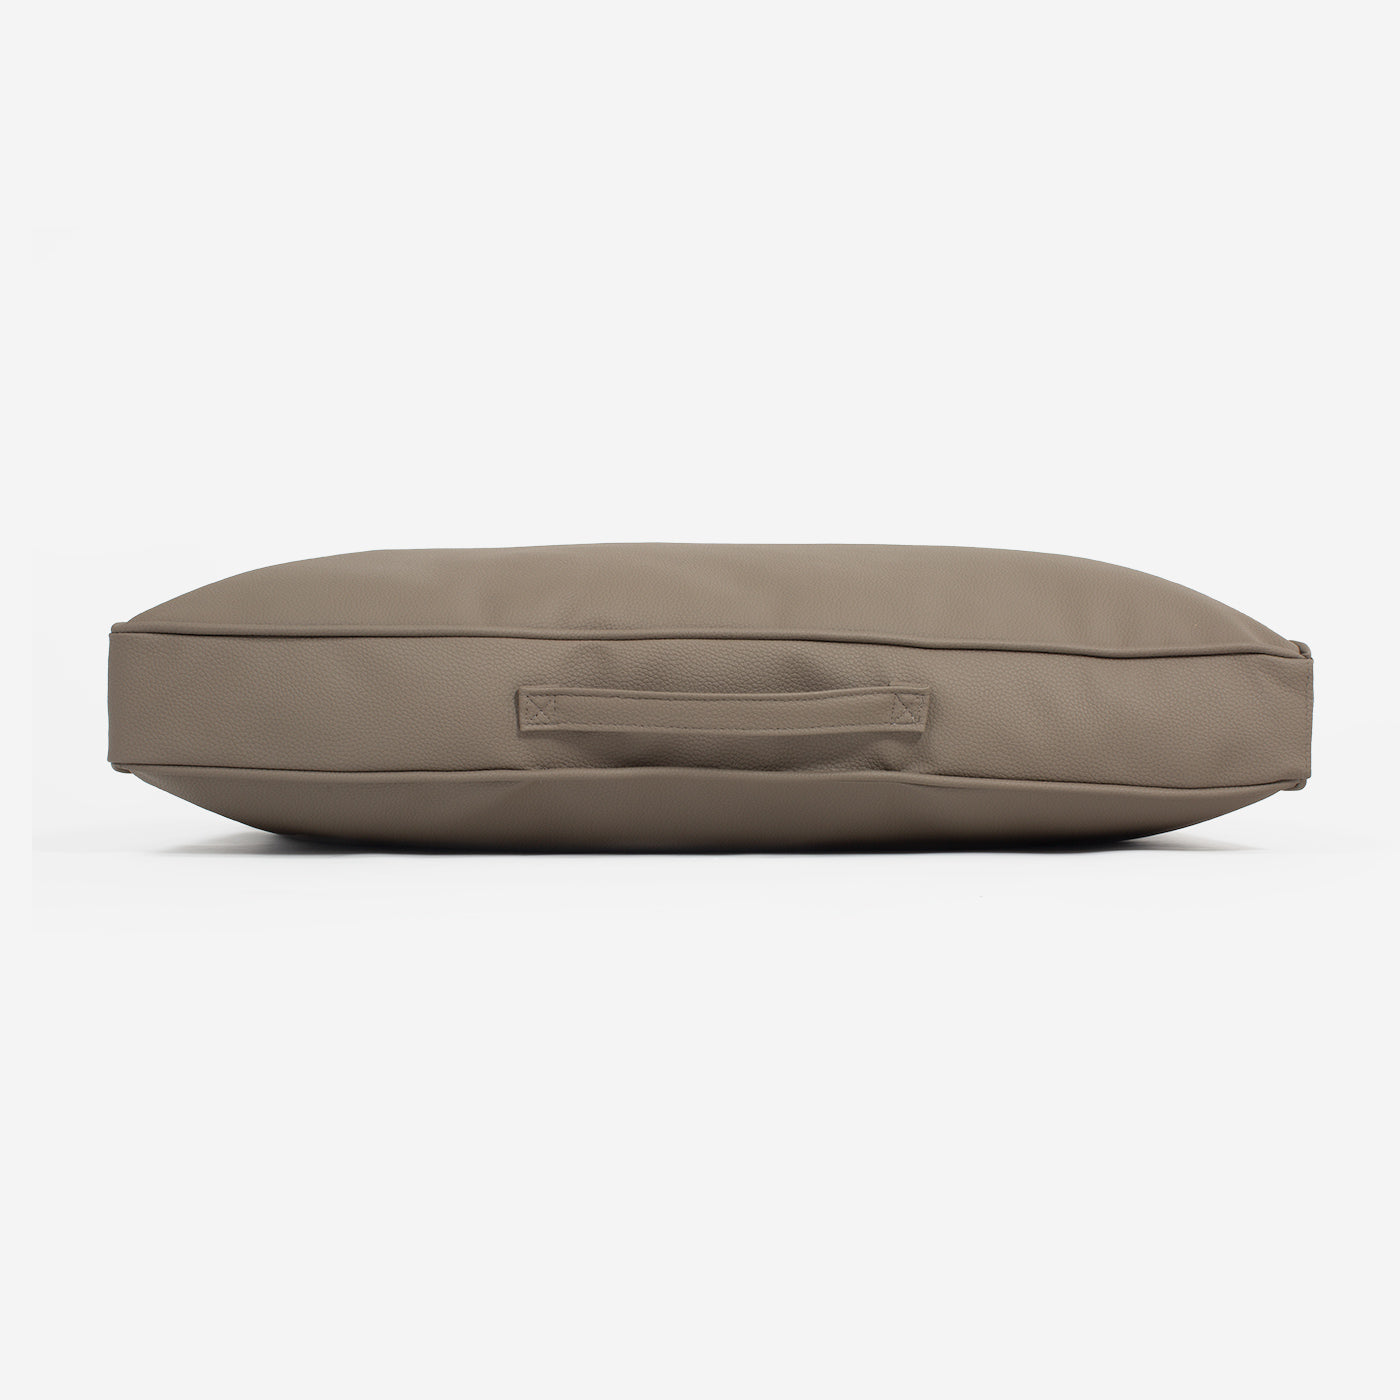 [color:camel] Luxury Dog Cushion in Rhino Tough Desert Faux Leather in Camel. The Perfect Pet Bed Time Accessory! Available Now at Lords & Labradors US